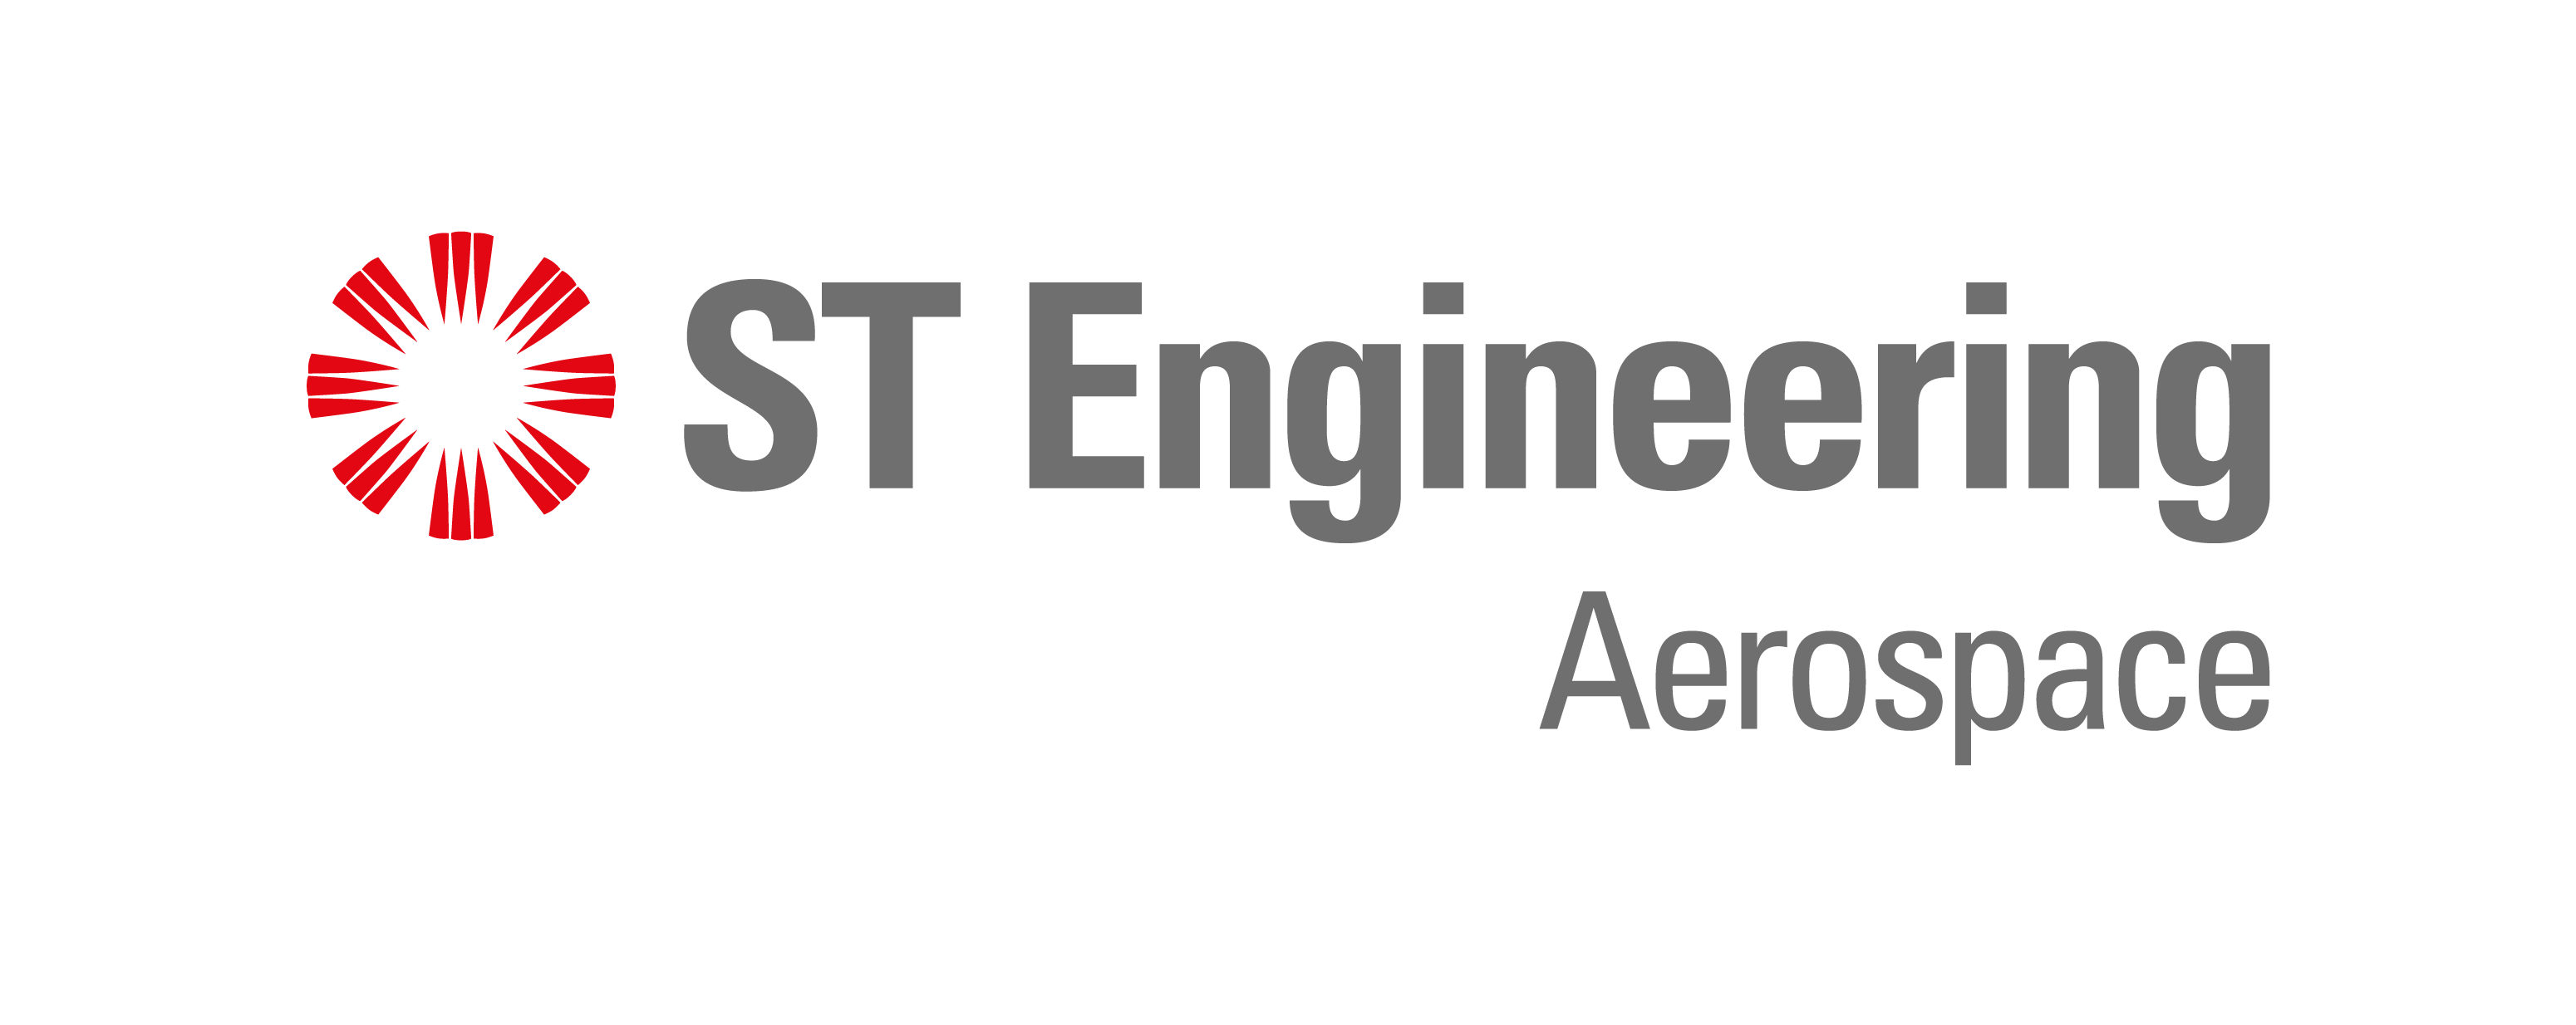 ST Engineering's Aerospace Sector Secures New Contracts